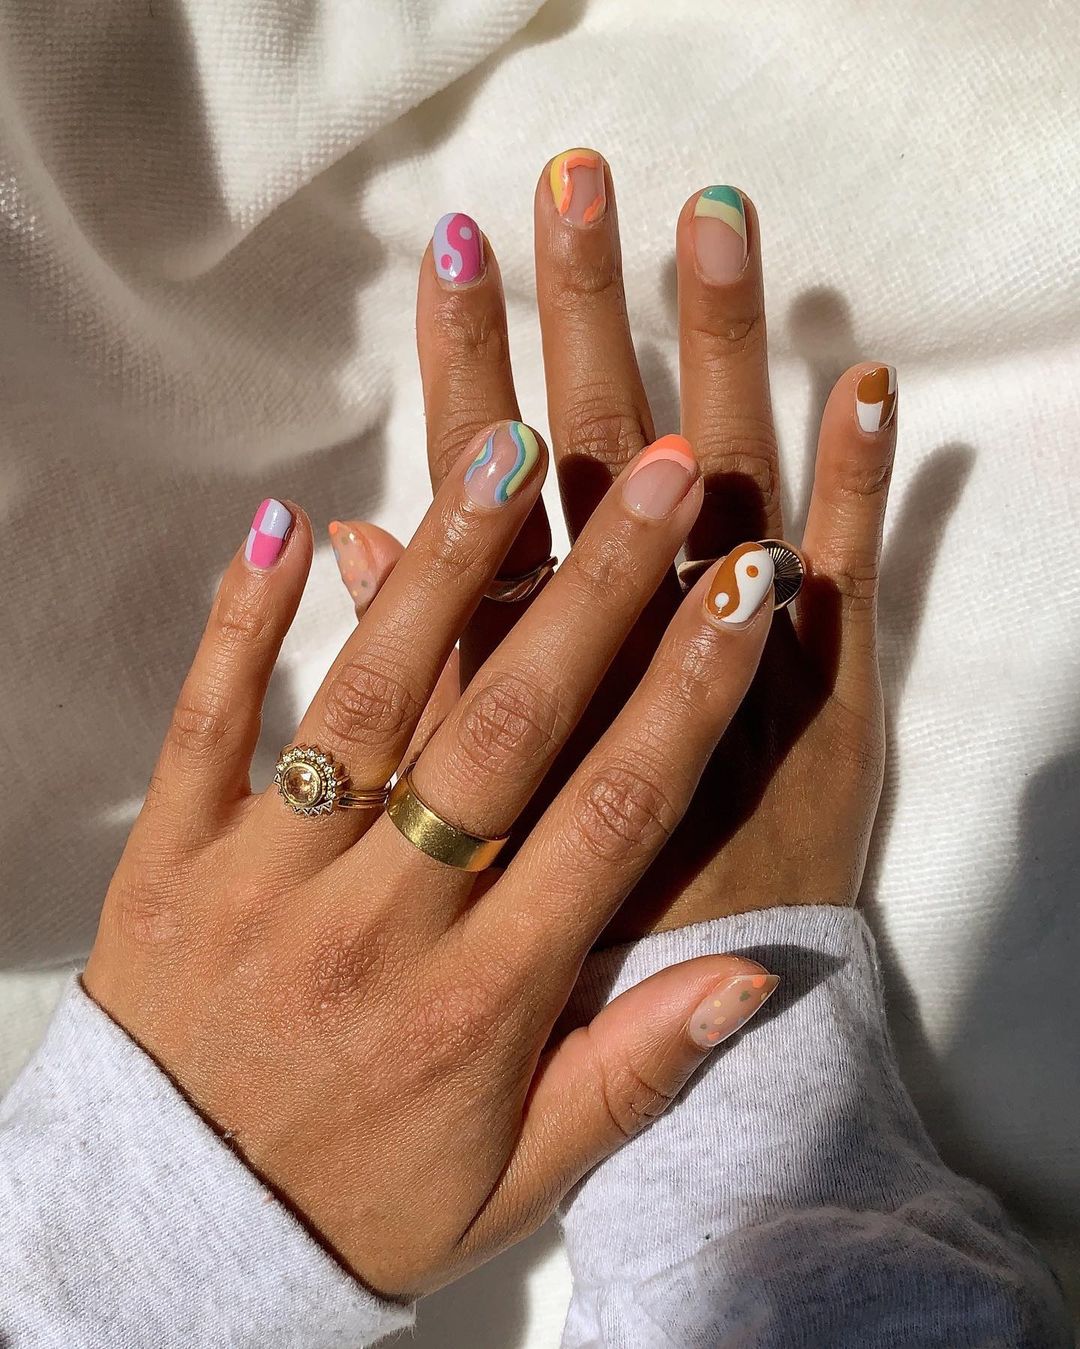 Checkered Nails Are Officially the Coolest Manicure of the Season | Glamour